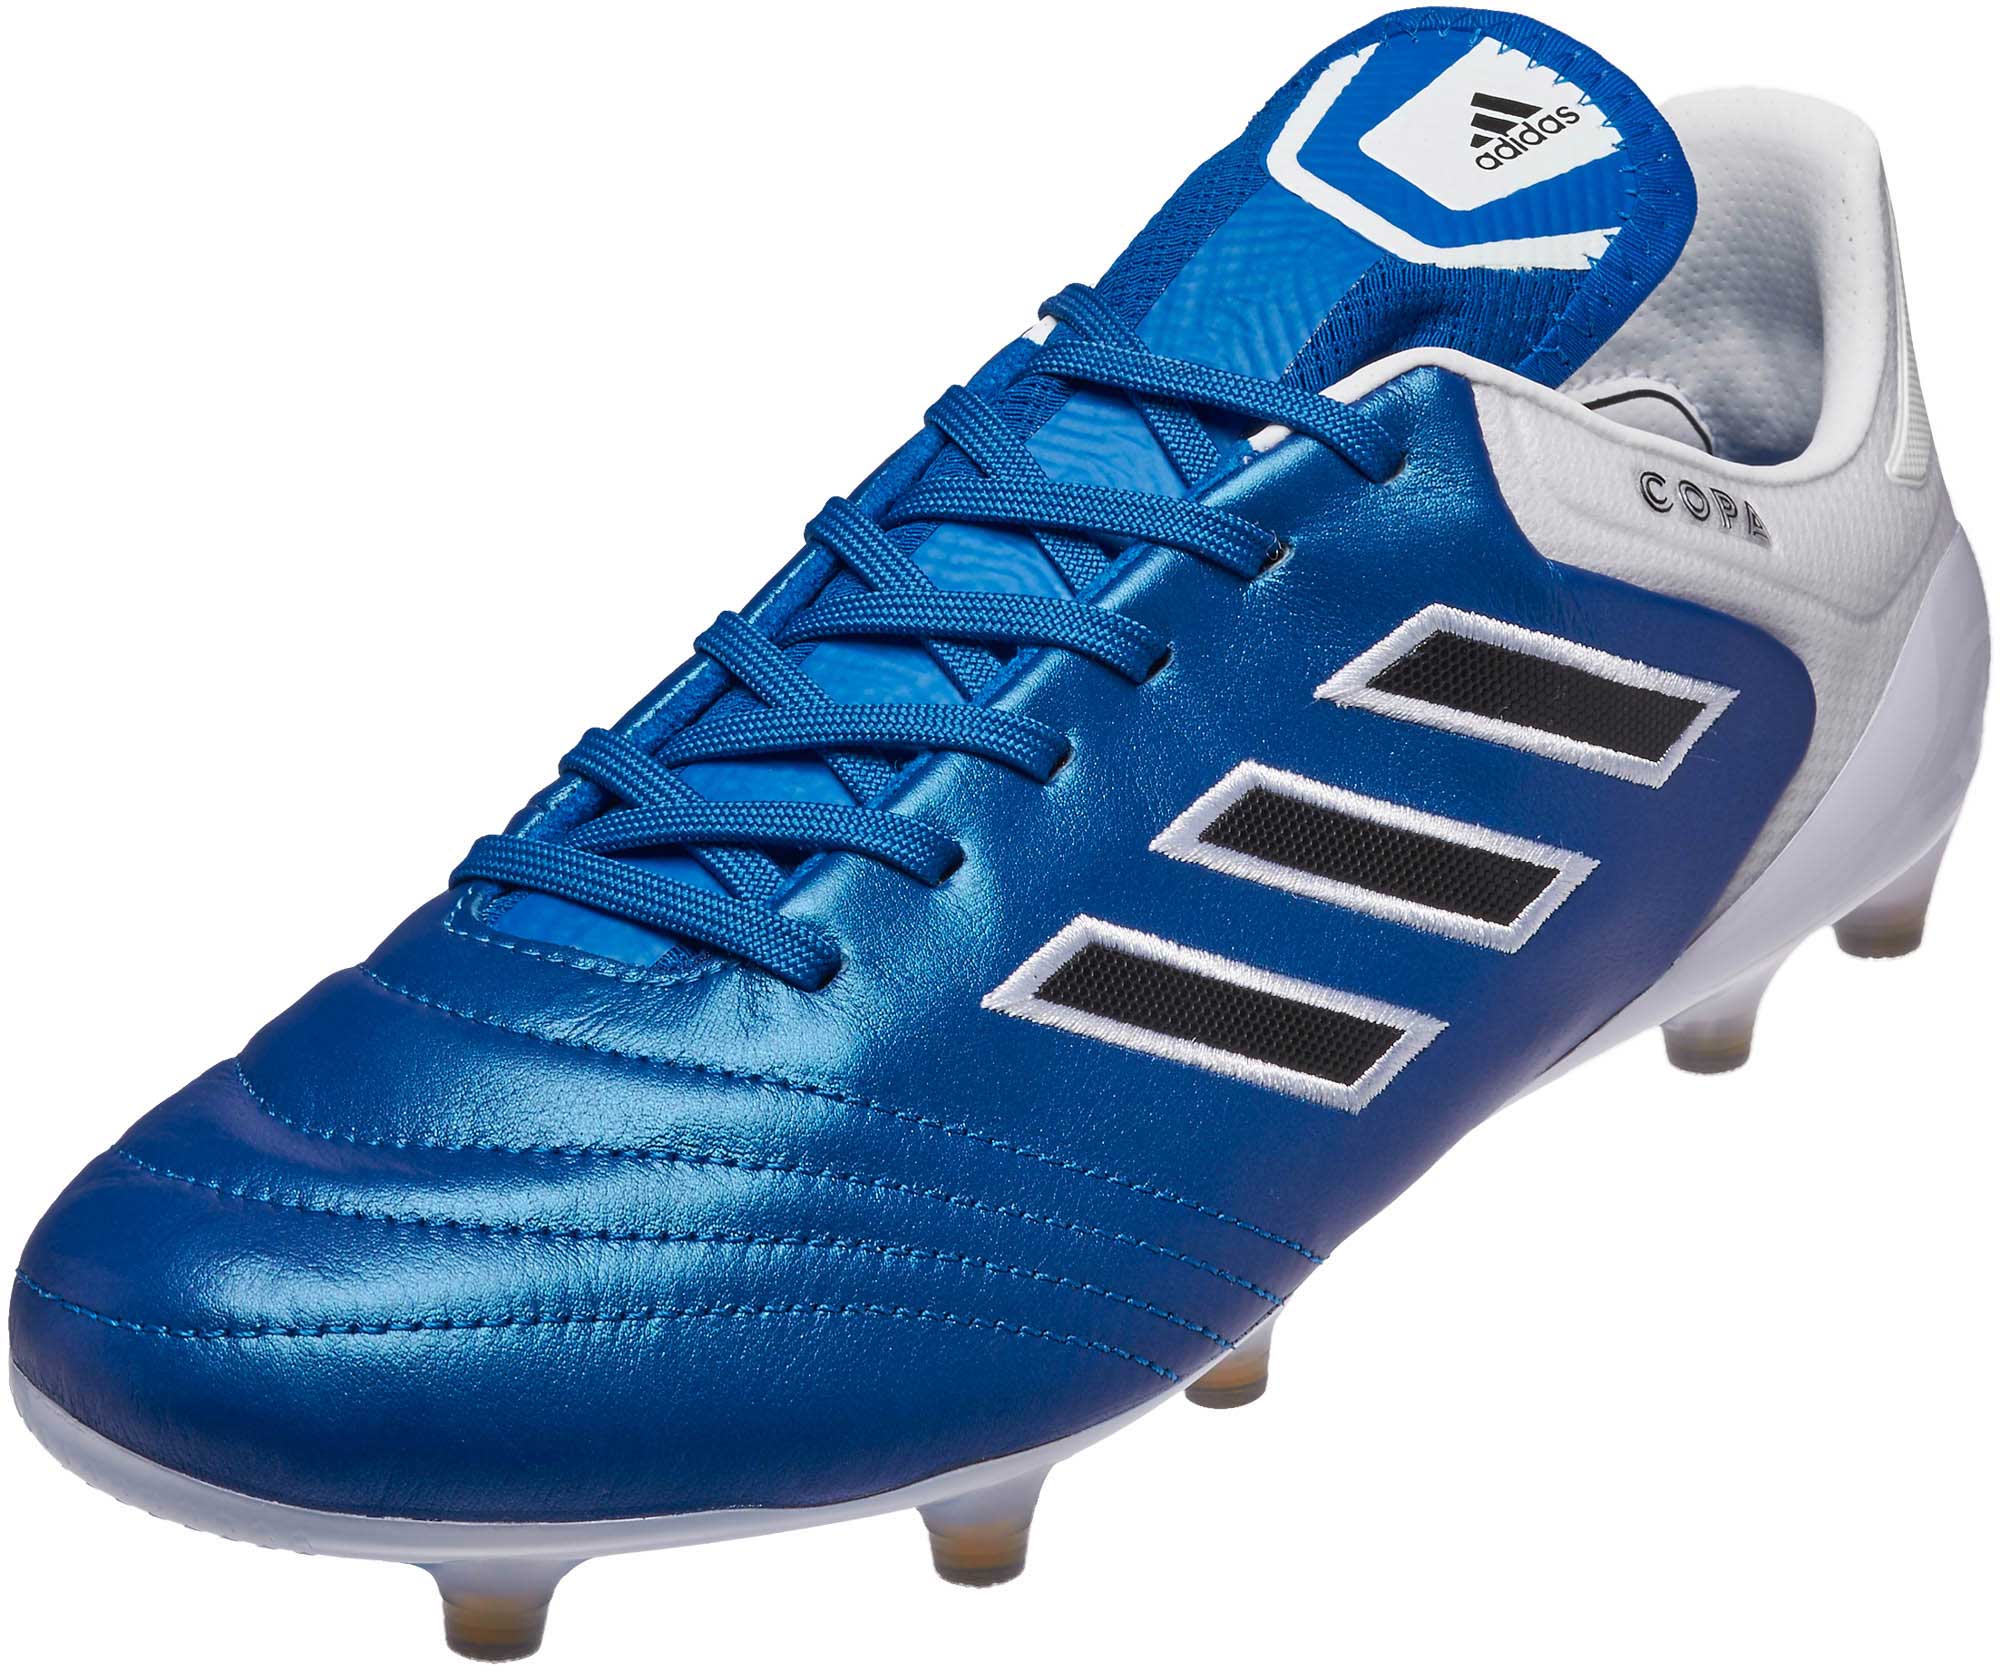 adidas Copa 17.1 FG Soccer Cleats - Copa Soccer Shoes